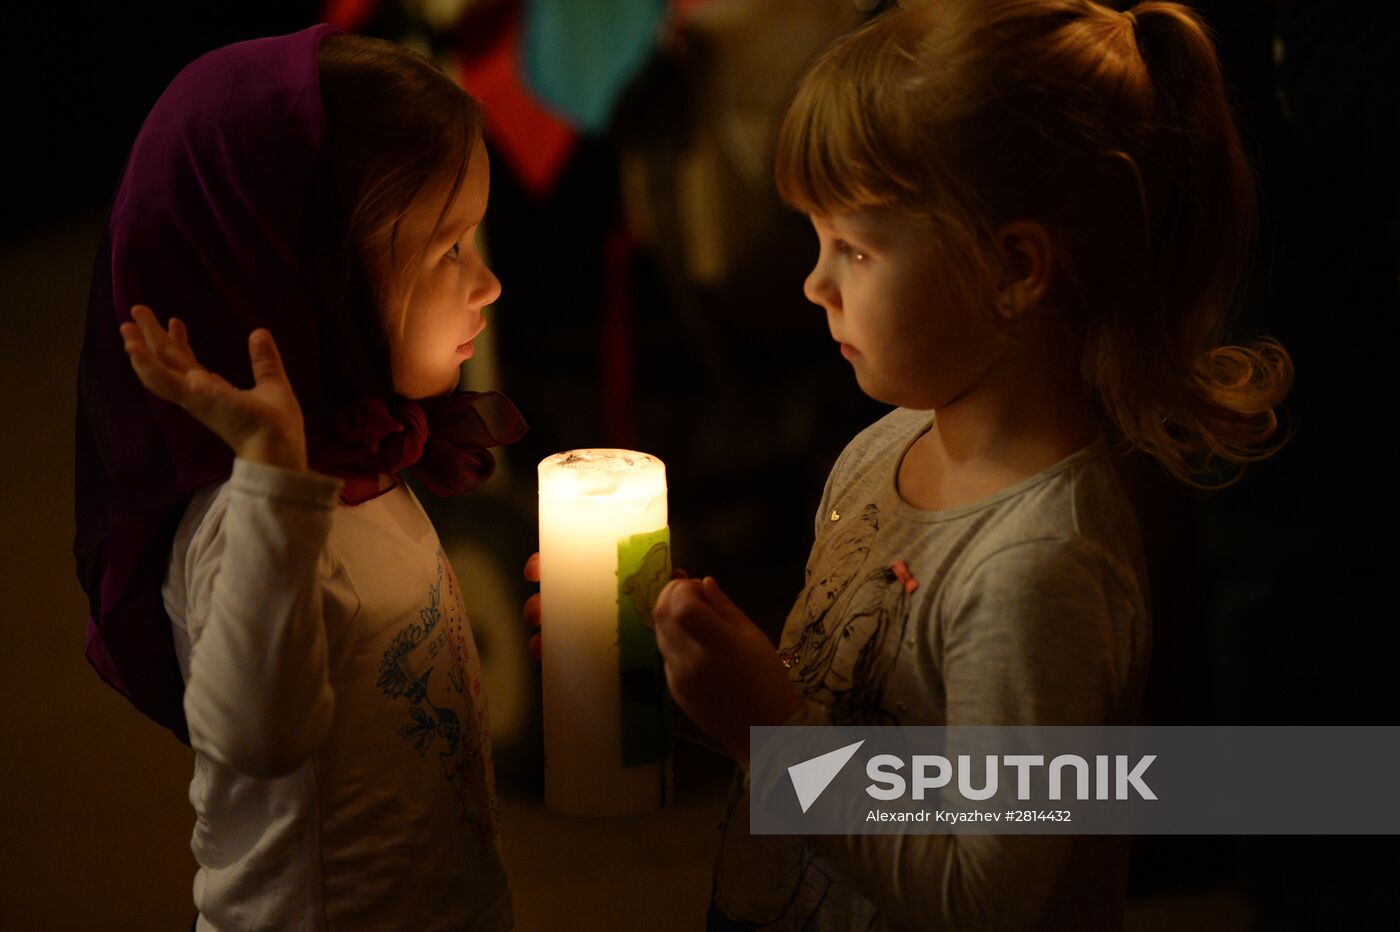 Catholic Easter celebrated in Russian regions